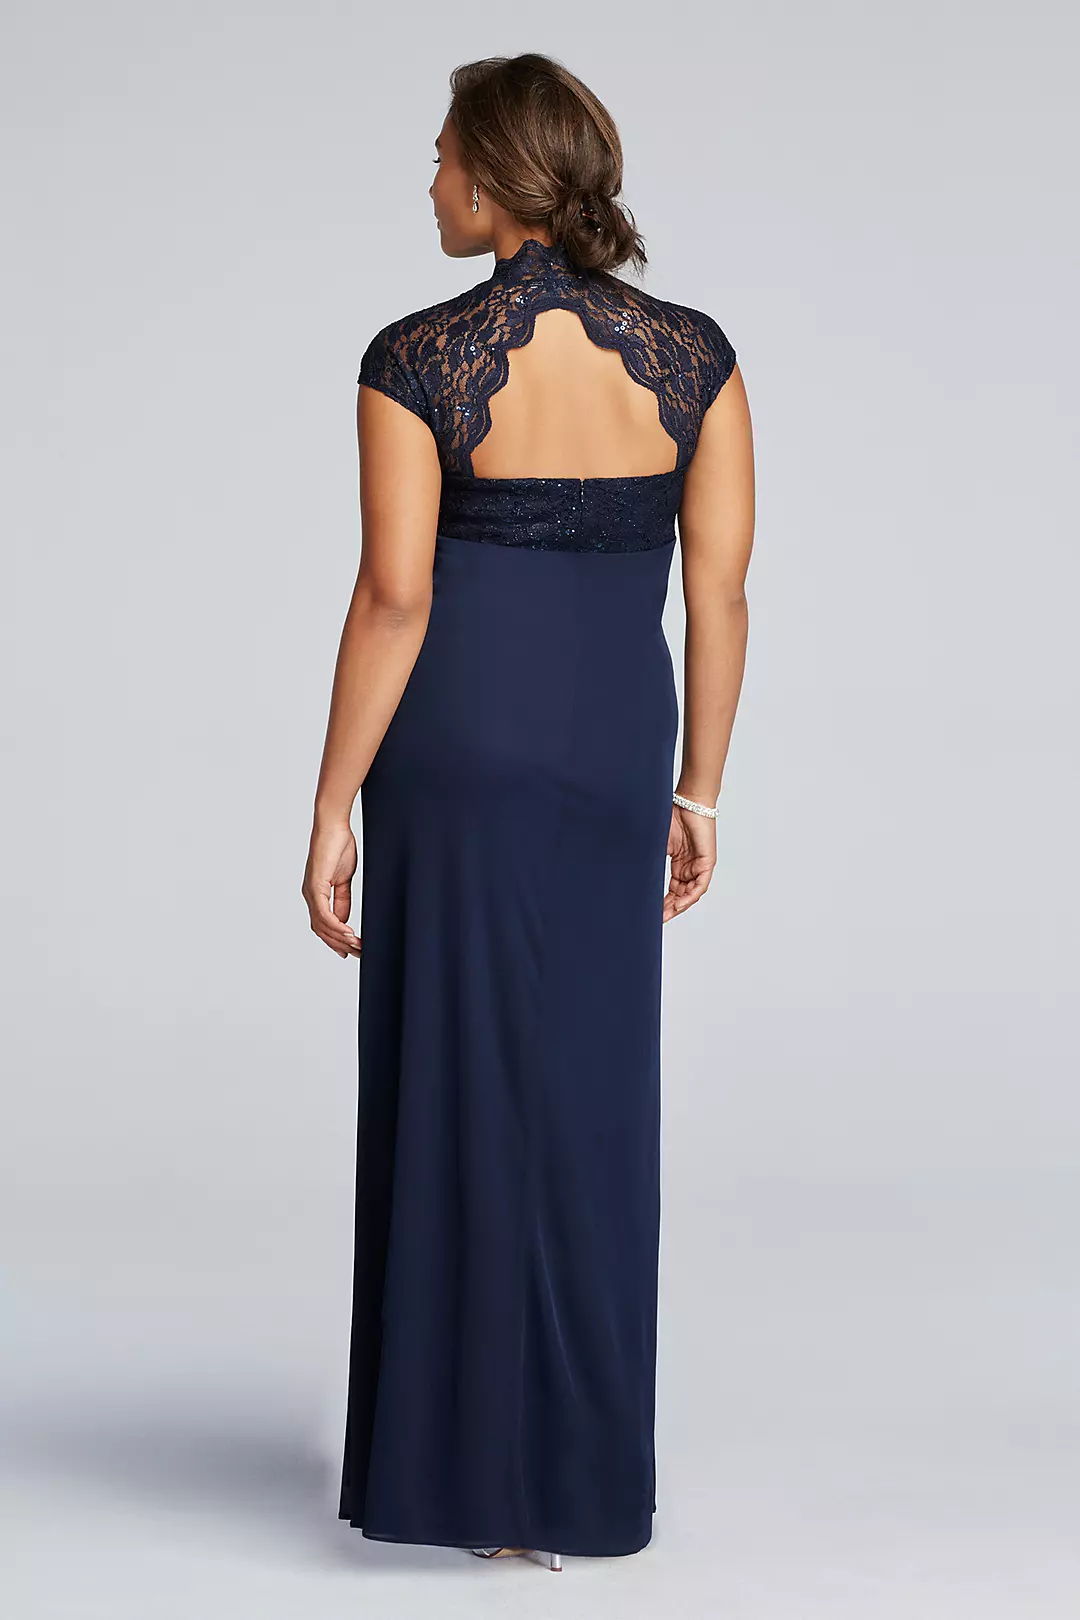 Lace Bodice Long Mesh Dress with Cap Sleeves Image 2